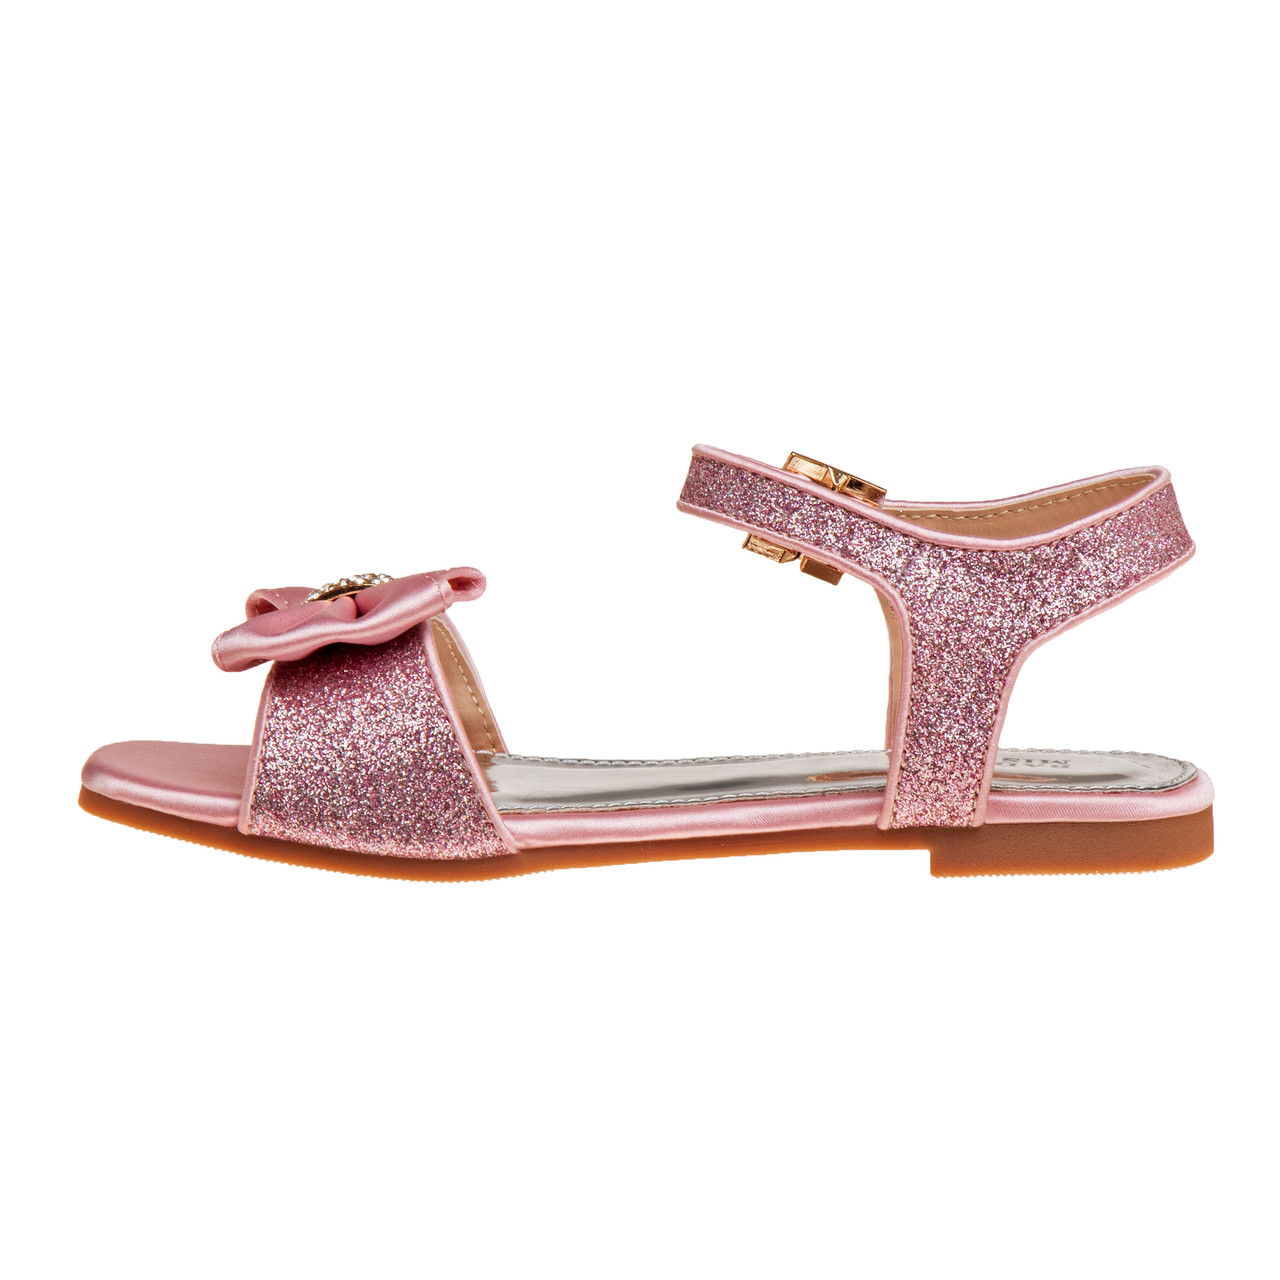 Buy Girls Gold Casual Sandals Online | SKU: 57-4965-15-25-Metro Shoes